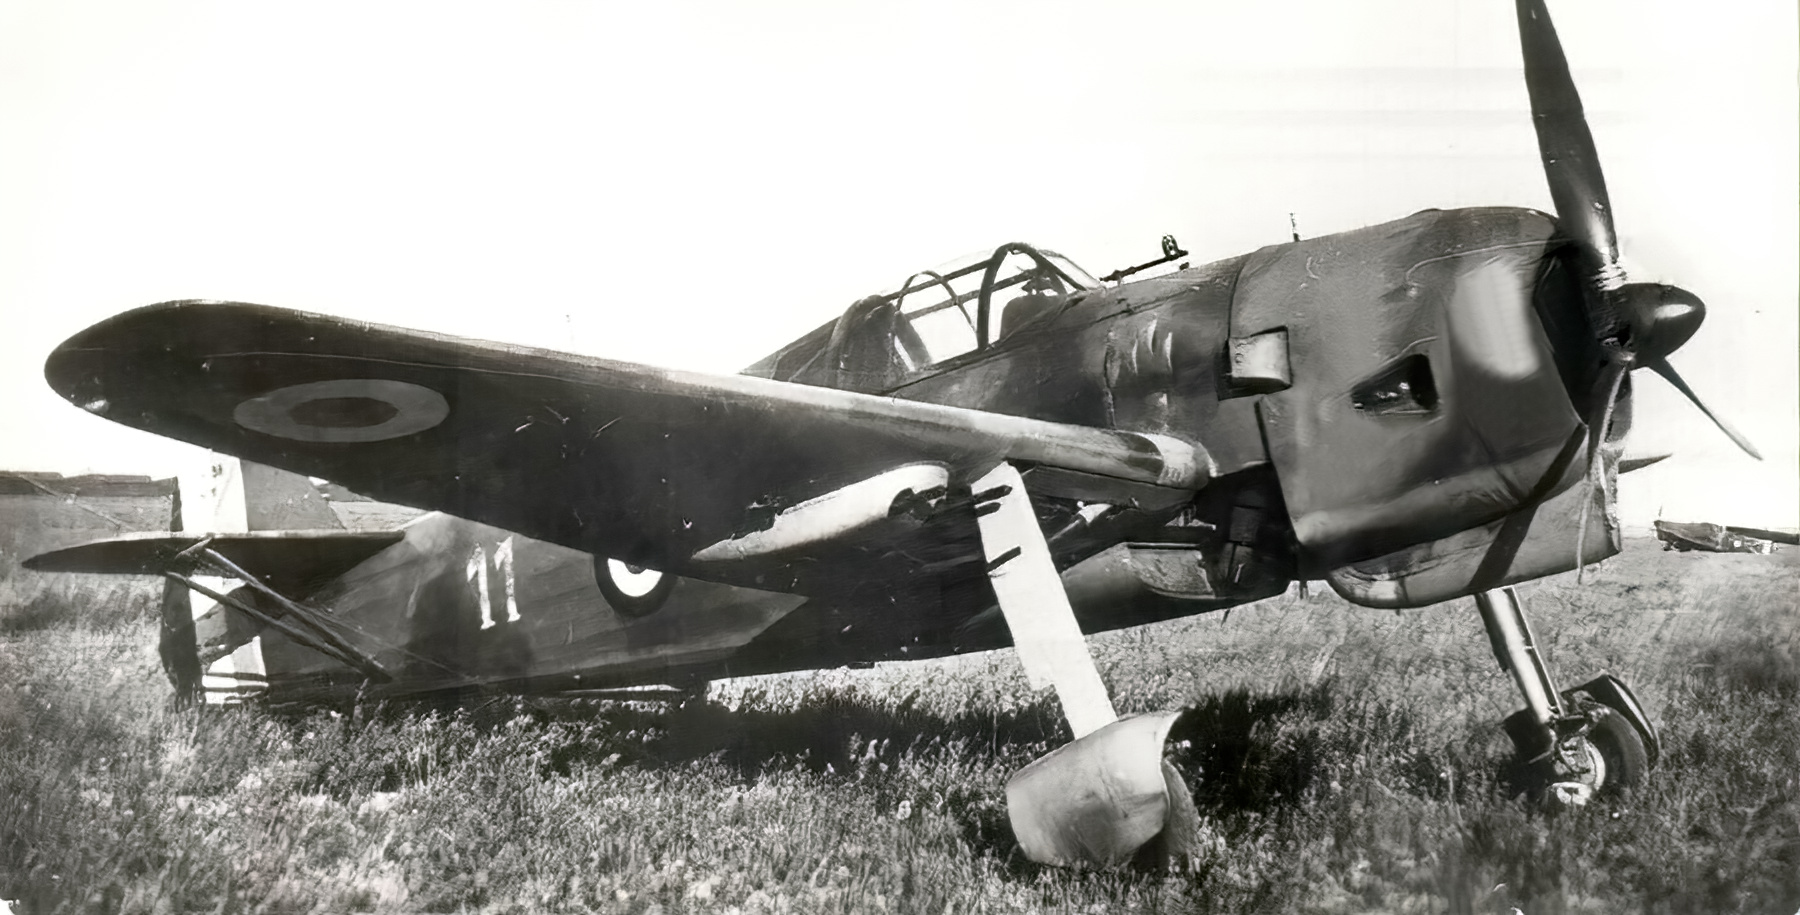 French Airforce Koolhoven FK58 White 11 powered by Gnome Rhone 14N 49 engine France 1940 01